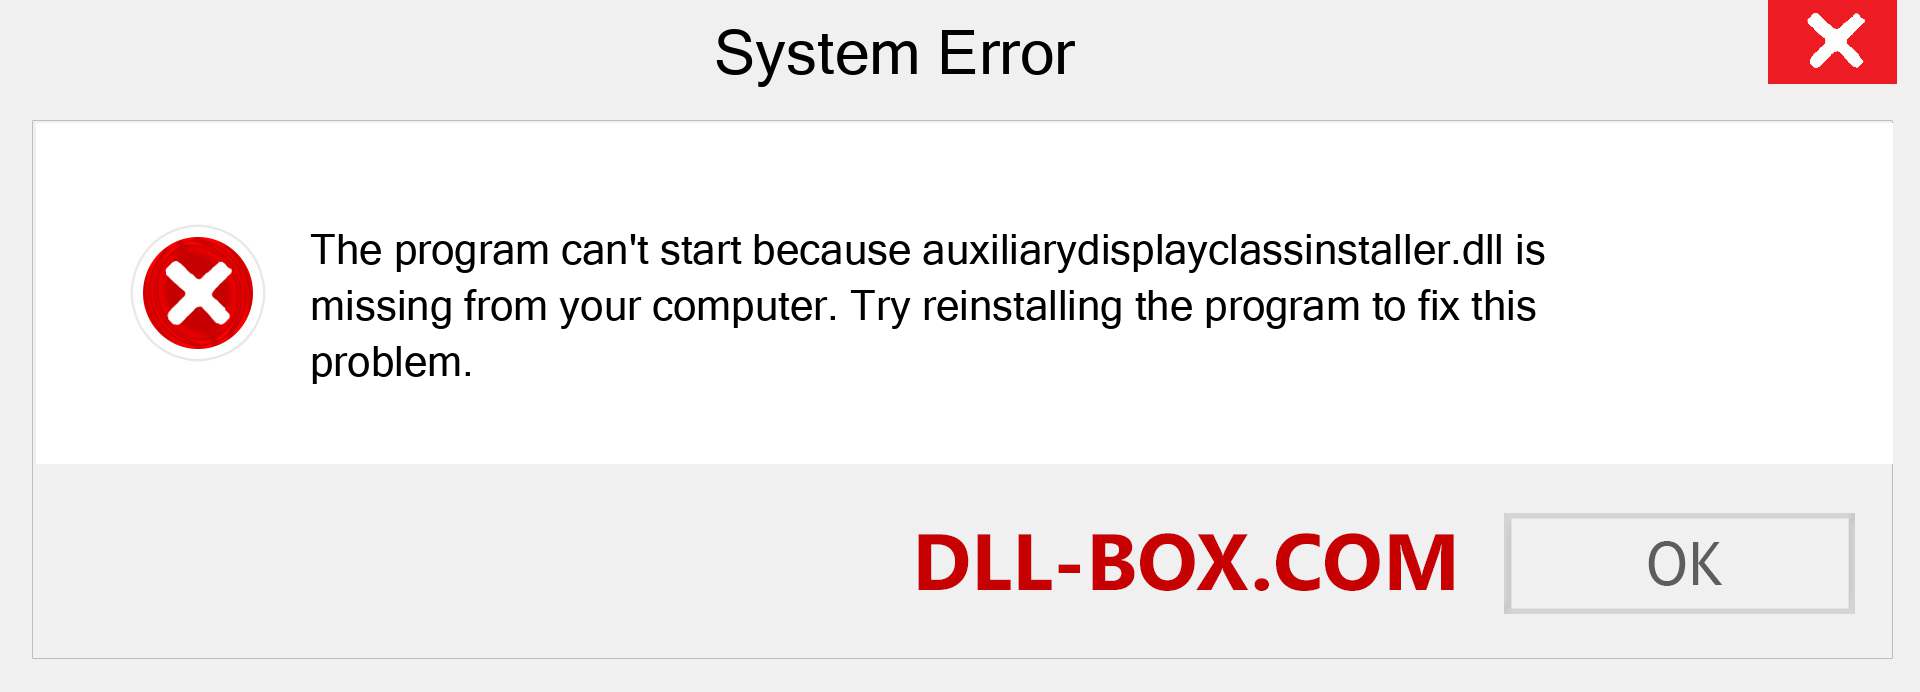  auxiliarydisplayclassinstaller.dll file is missing?. Download for Windows 7, 8, 10 - Fix  auxiliarydisplayclassinstaller dll Missing Error on Windows, photos, images